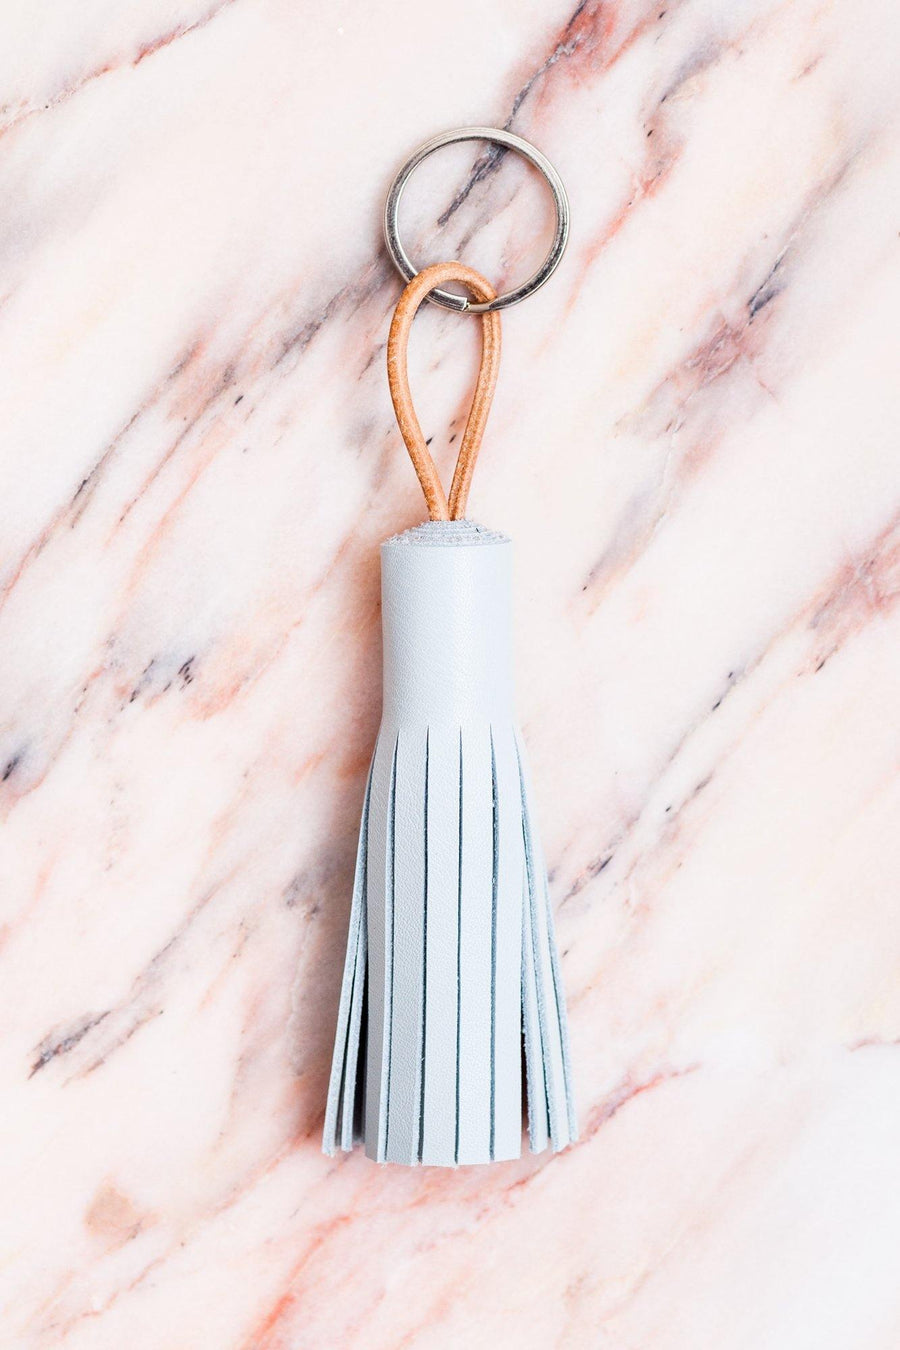 Coppius Leather Key Chain Tassle Pale Blue - The Good Store Berlin